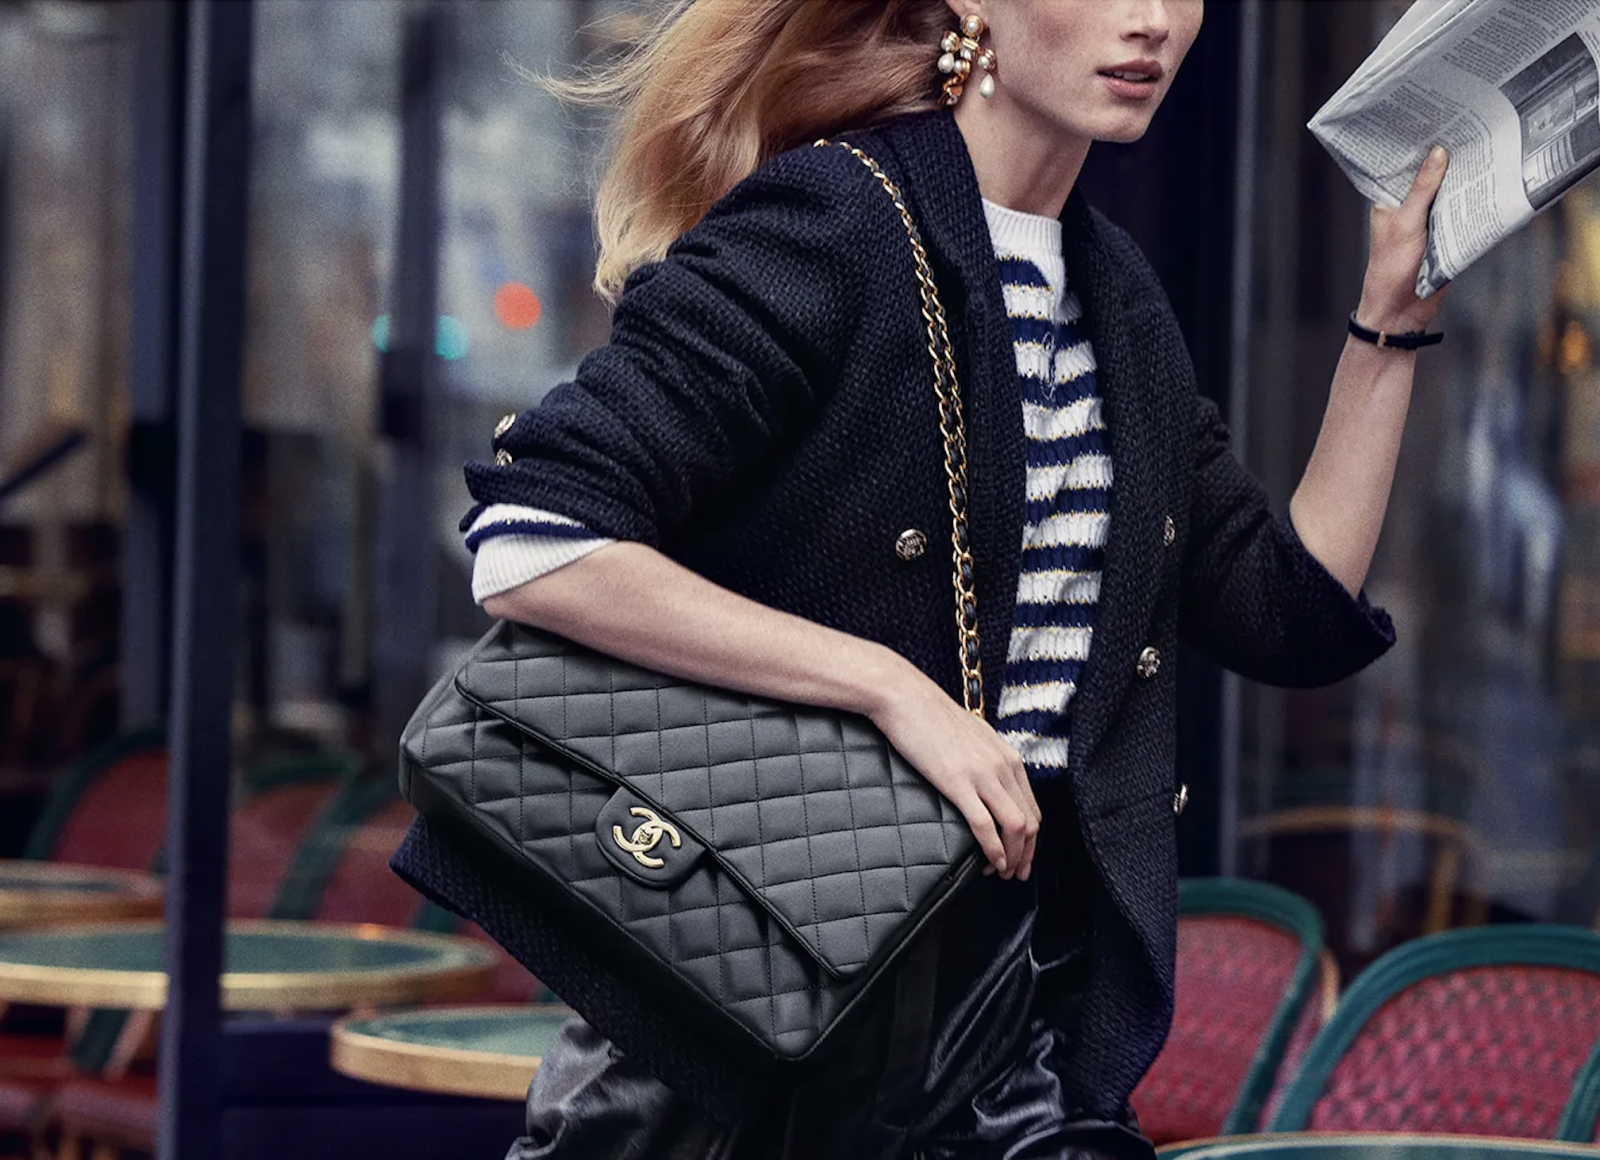 how much is a quilted chanel bag